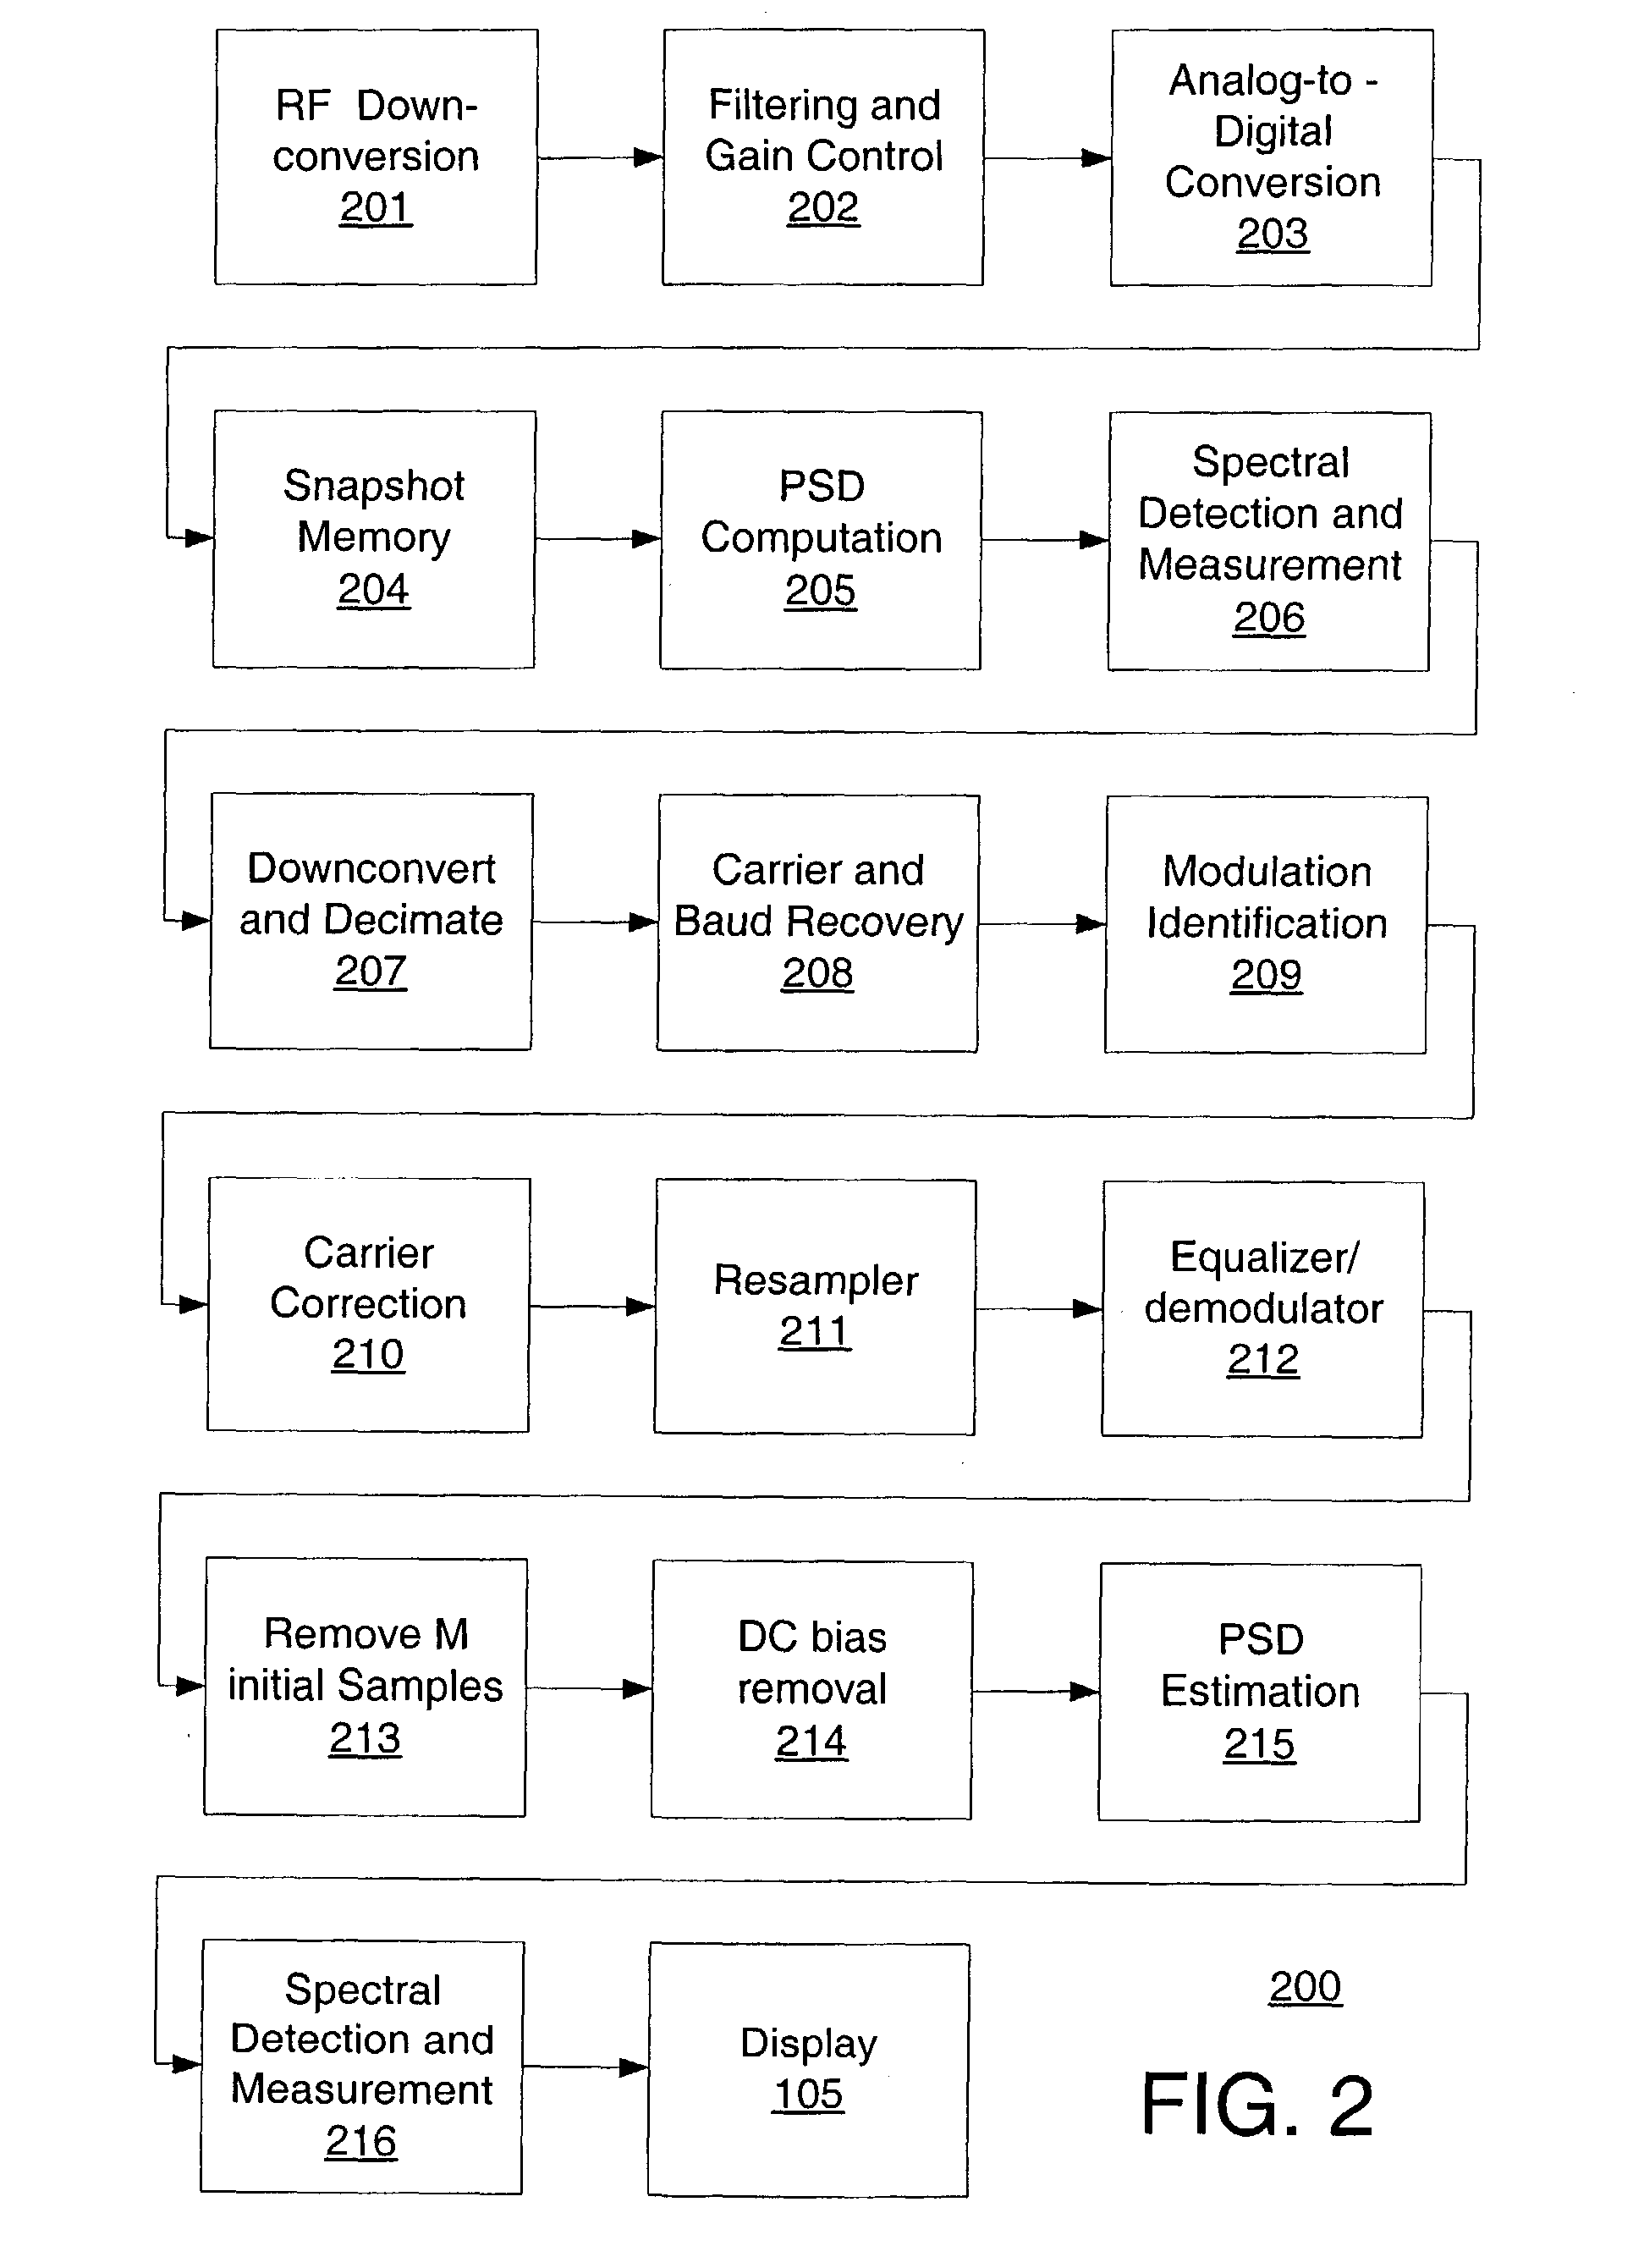 Detecting and measuring interference contained within a digital carrier